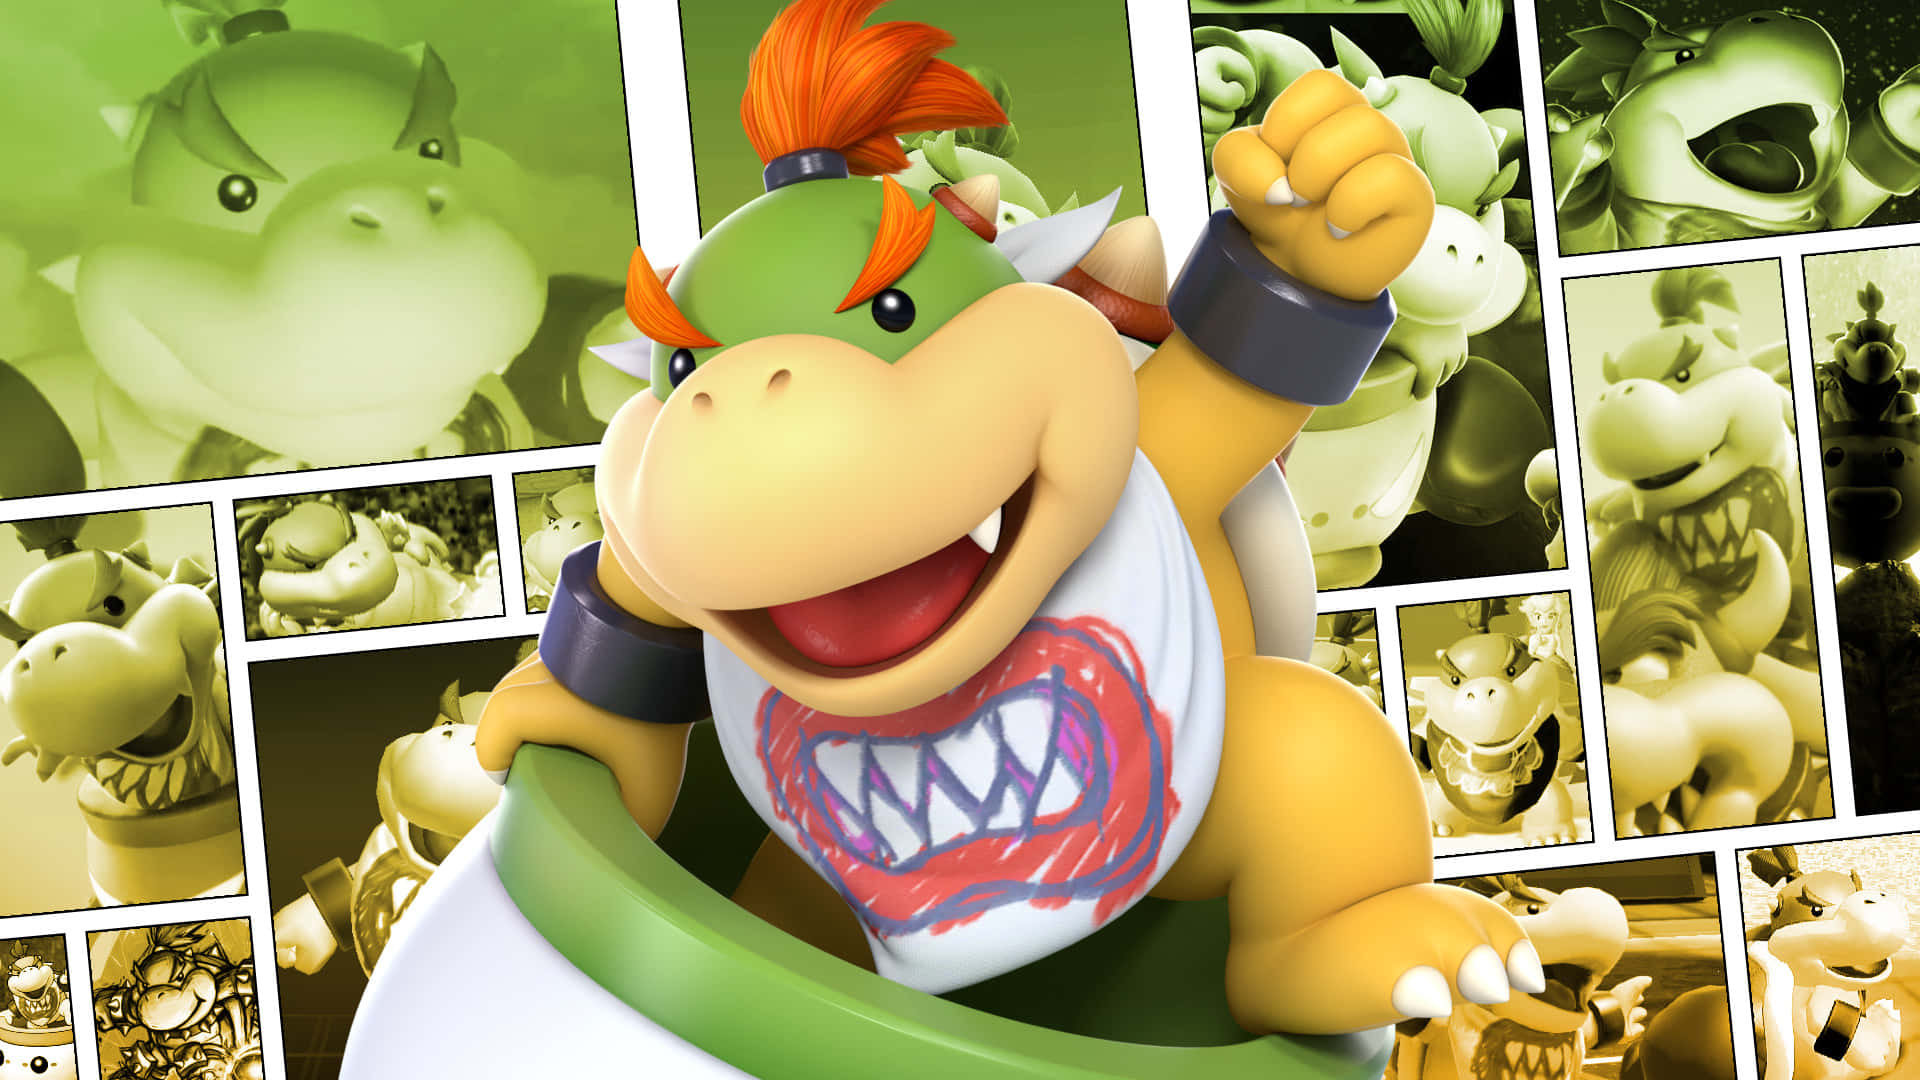 Mischievous Bowser Jr. Smiling on Fiery Ground Wallpaper